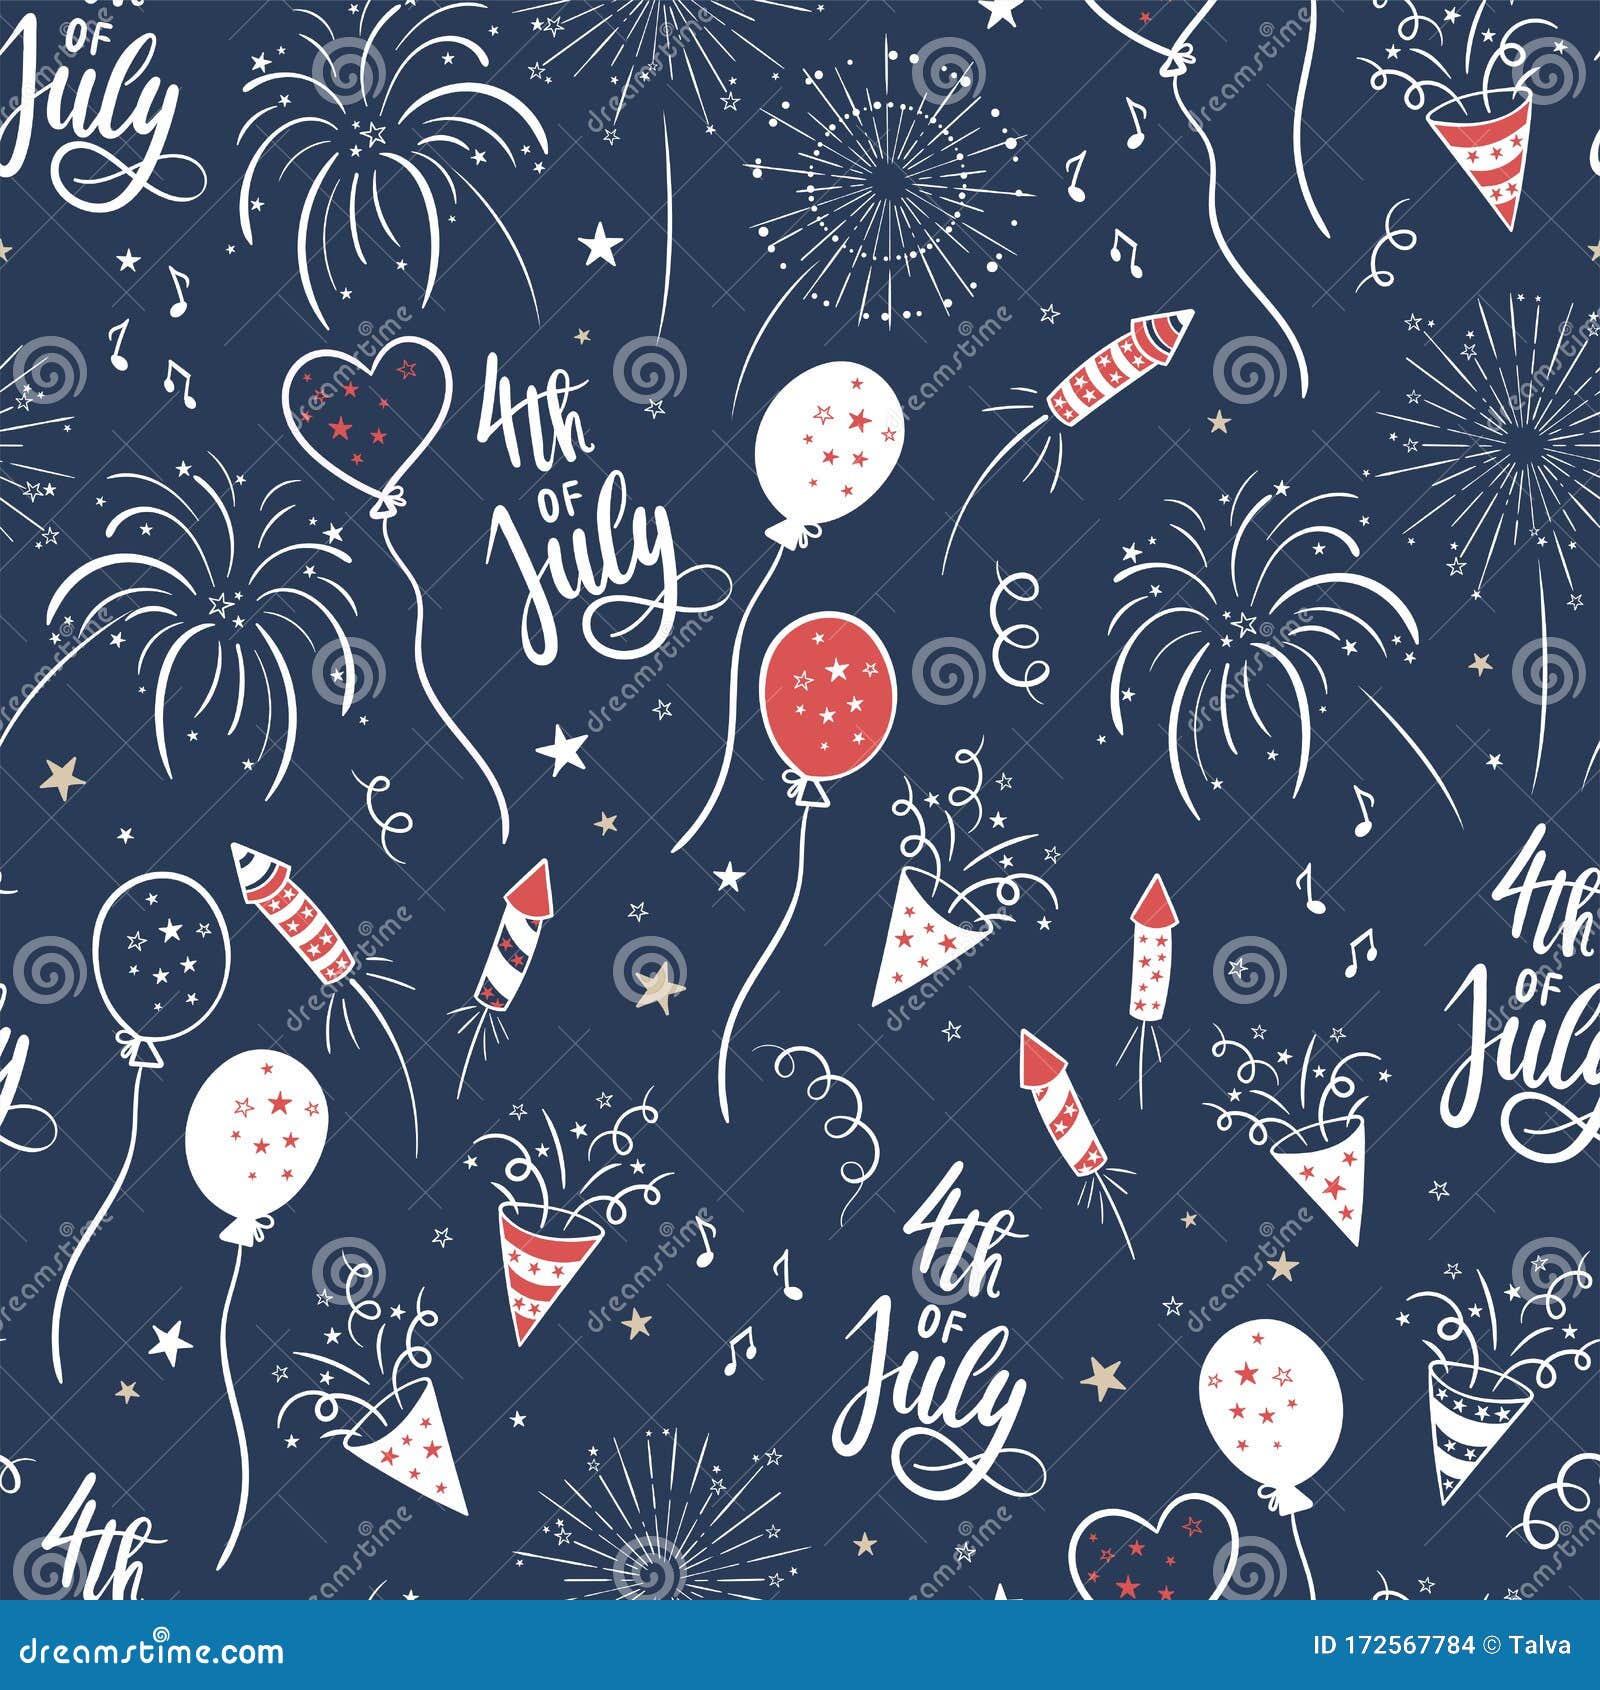 Fun Hand Drawn 4th July Party Seamless Pattern, Great for Banners,  Wallpapers, Textiles, Wrapping, Cards - Vector Design Stock Vector -  Illustration of party, patriotic: 172567784